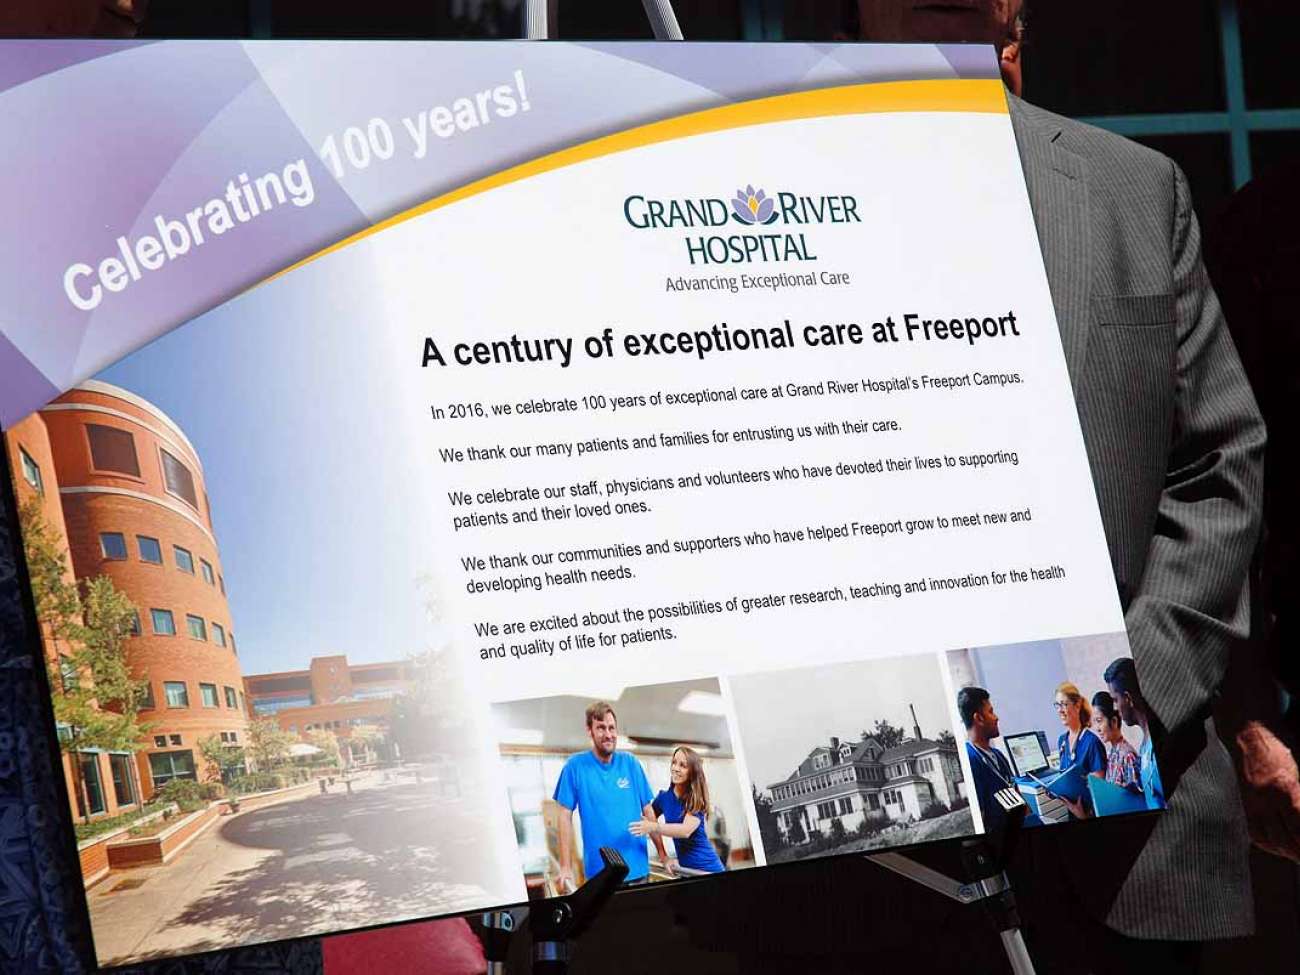 A plaque marking 100 years of care at Freeport